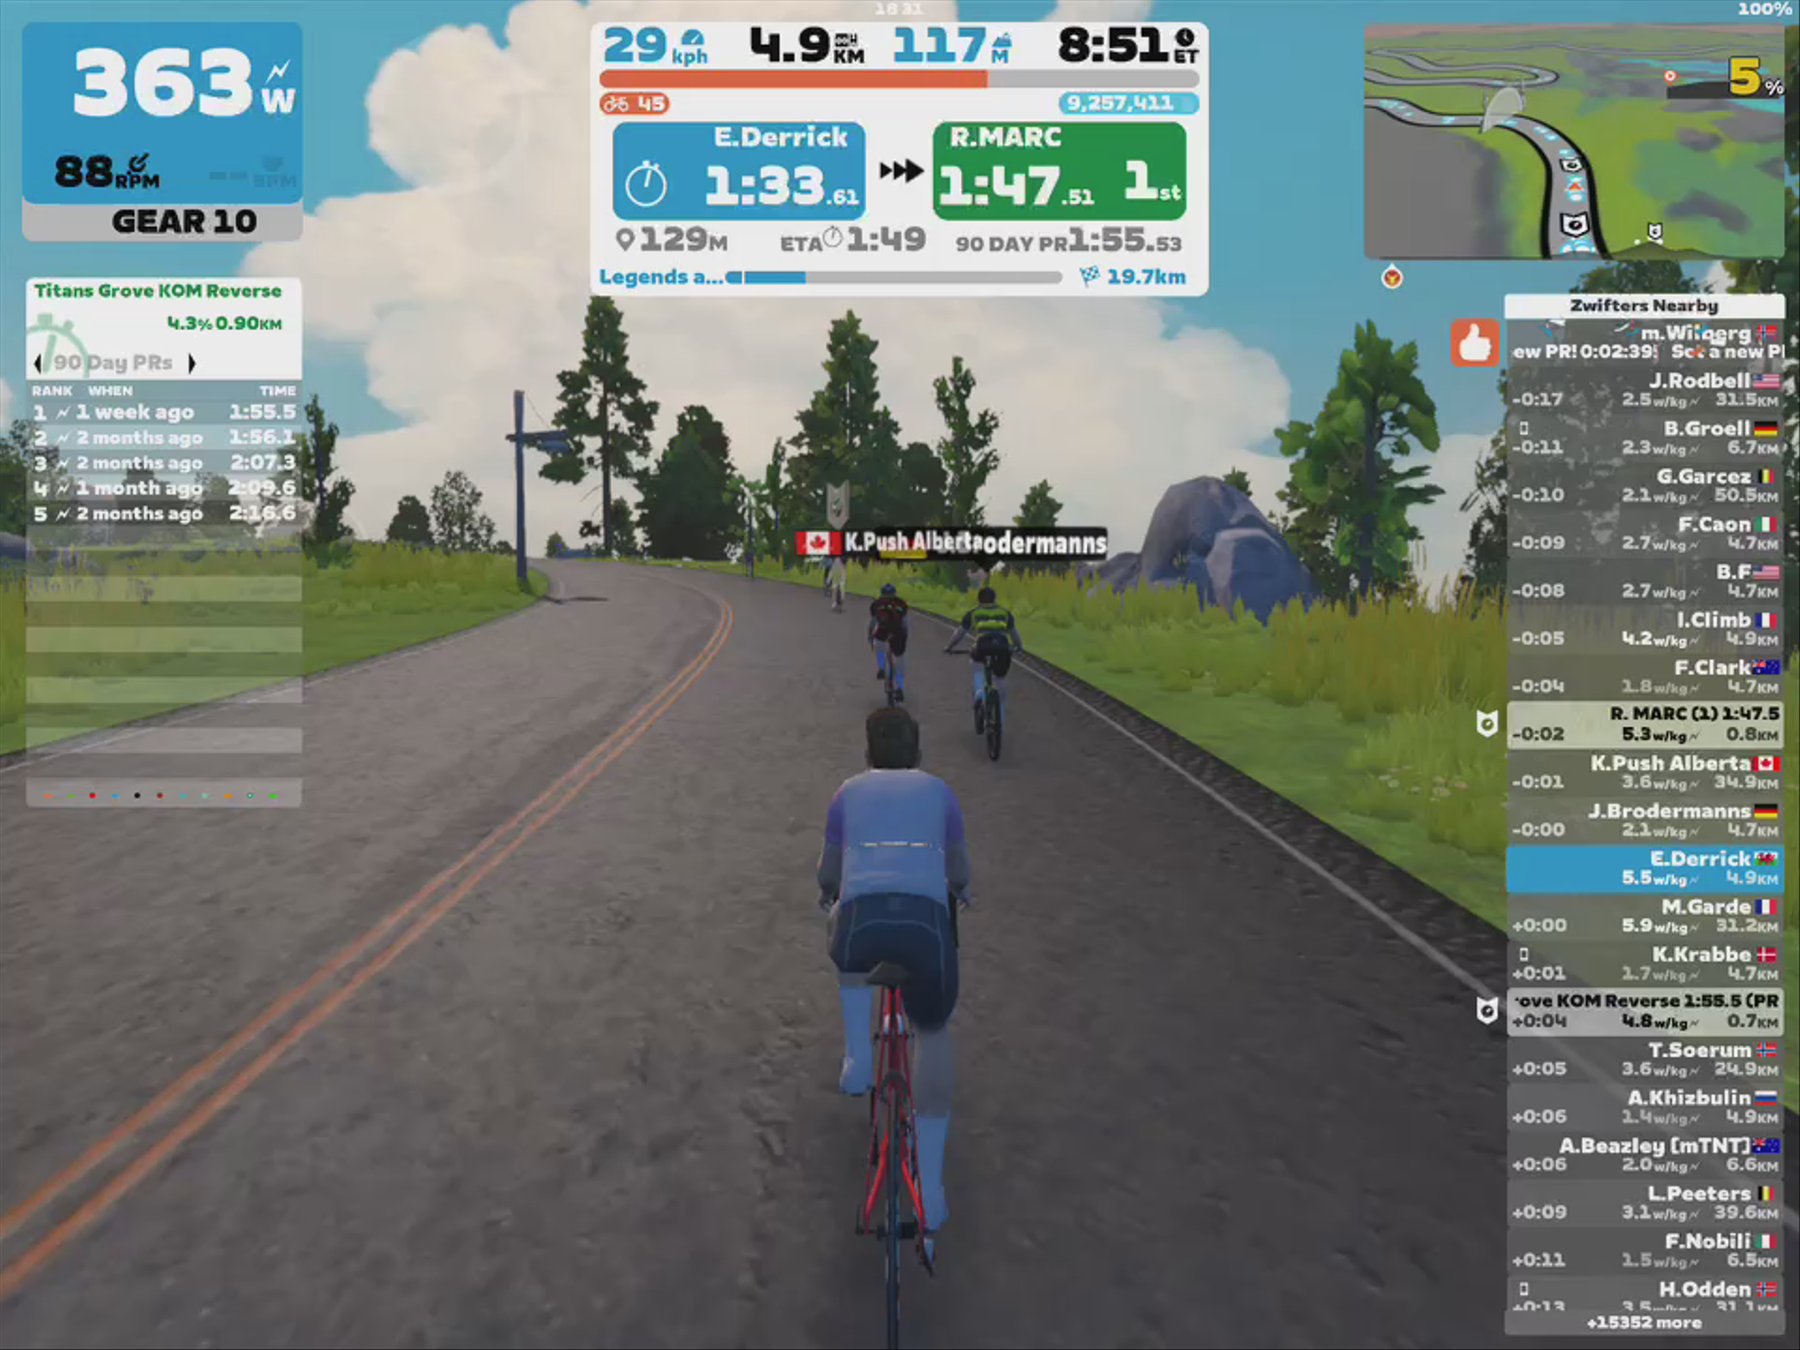 Zwift - Legends and Lava in Watopia